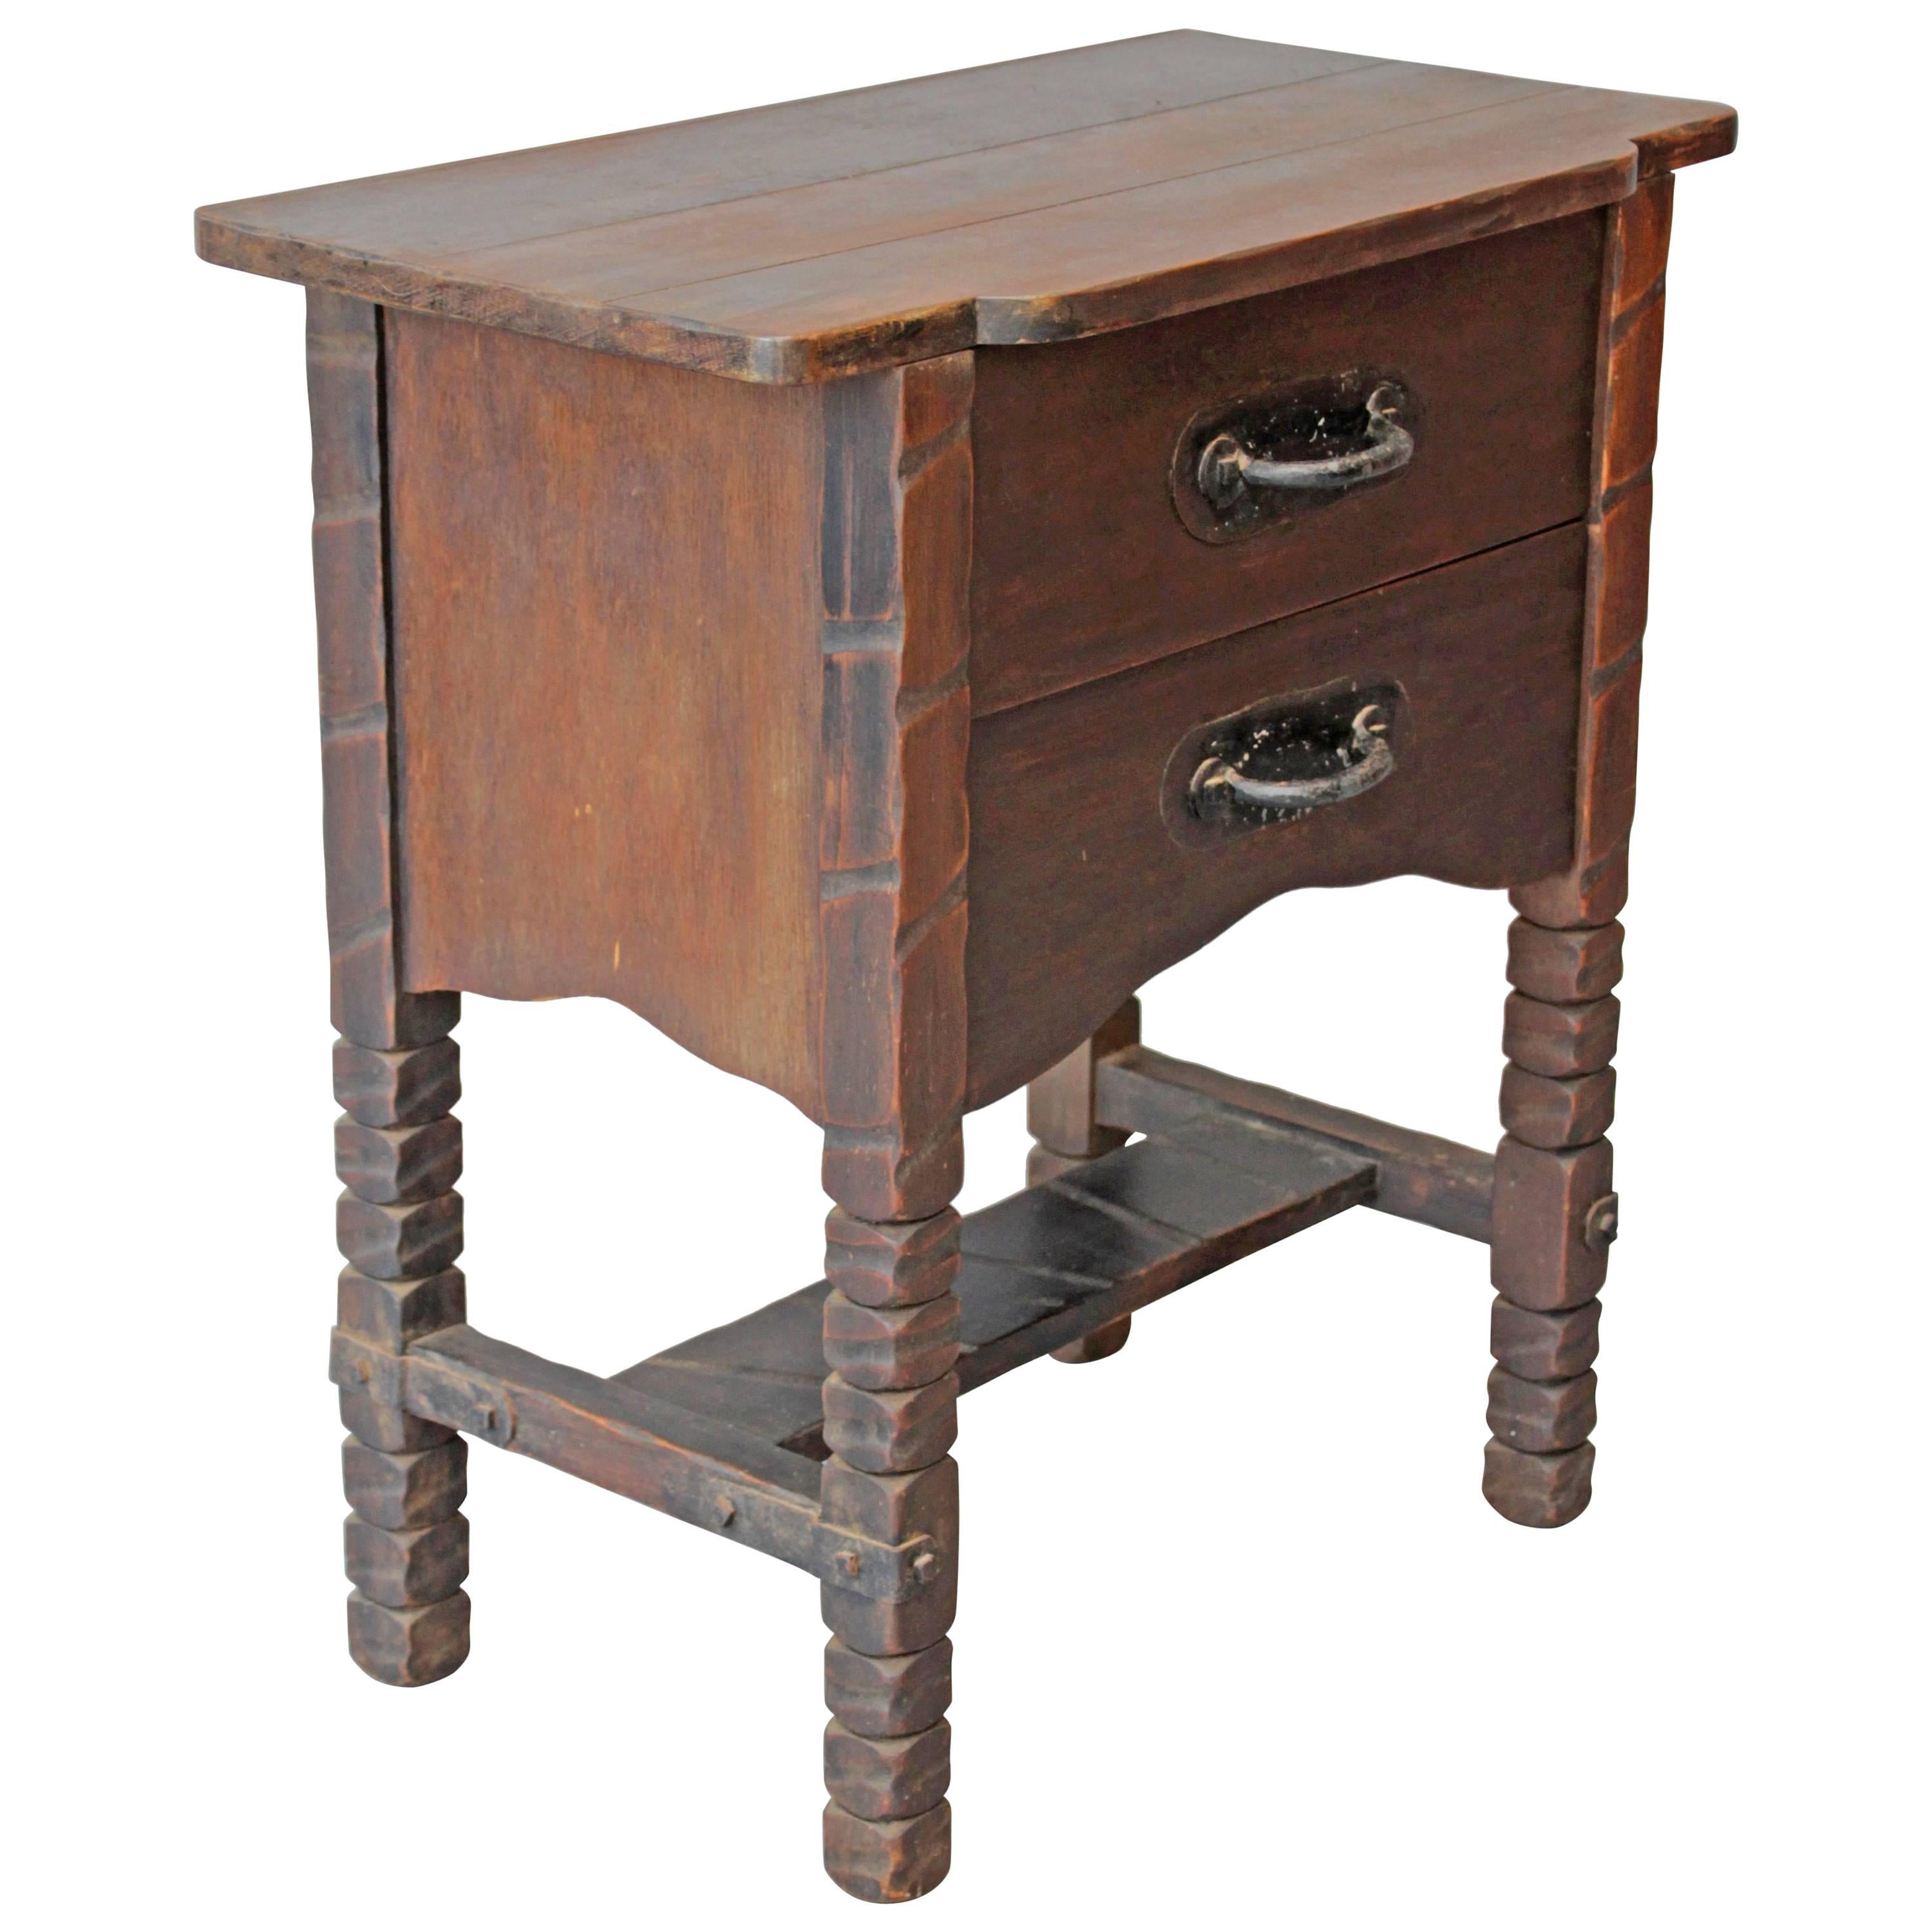 1930s Rare Monterey Nightstand in Old Wood Finish